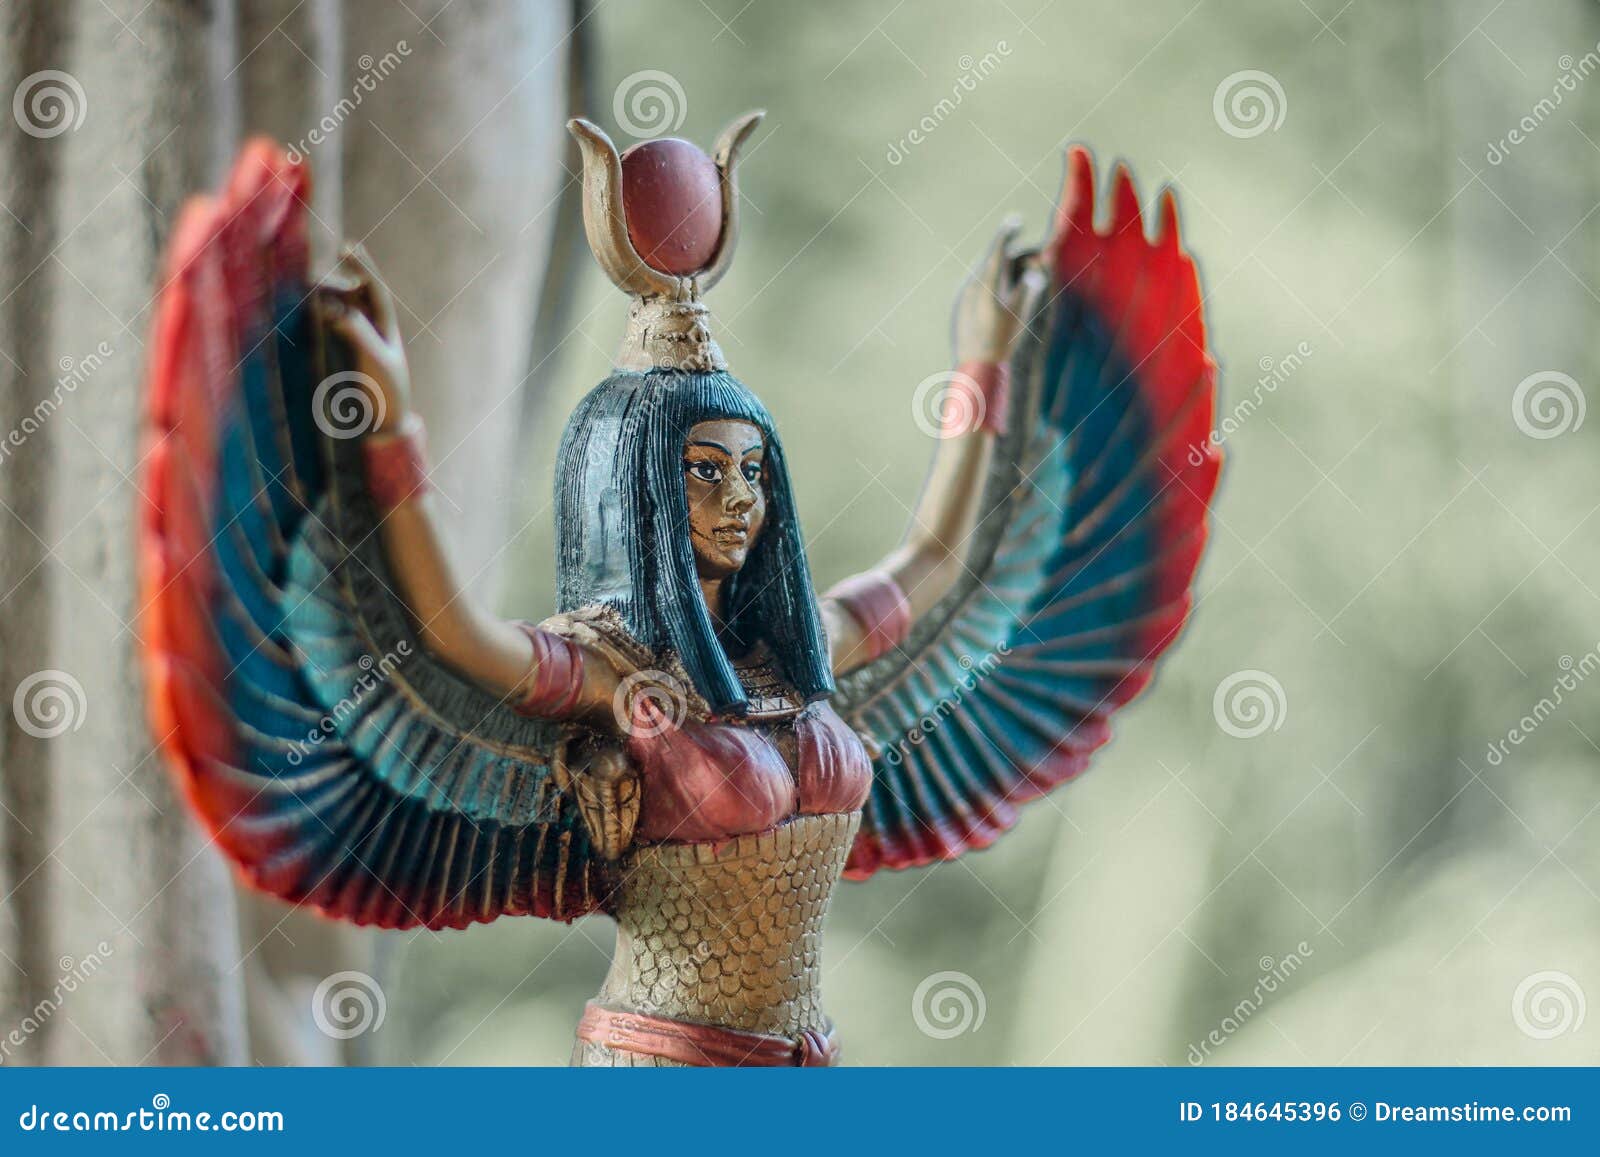 small sculpture of egyptian goddess isis